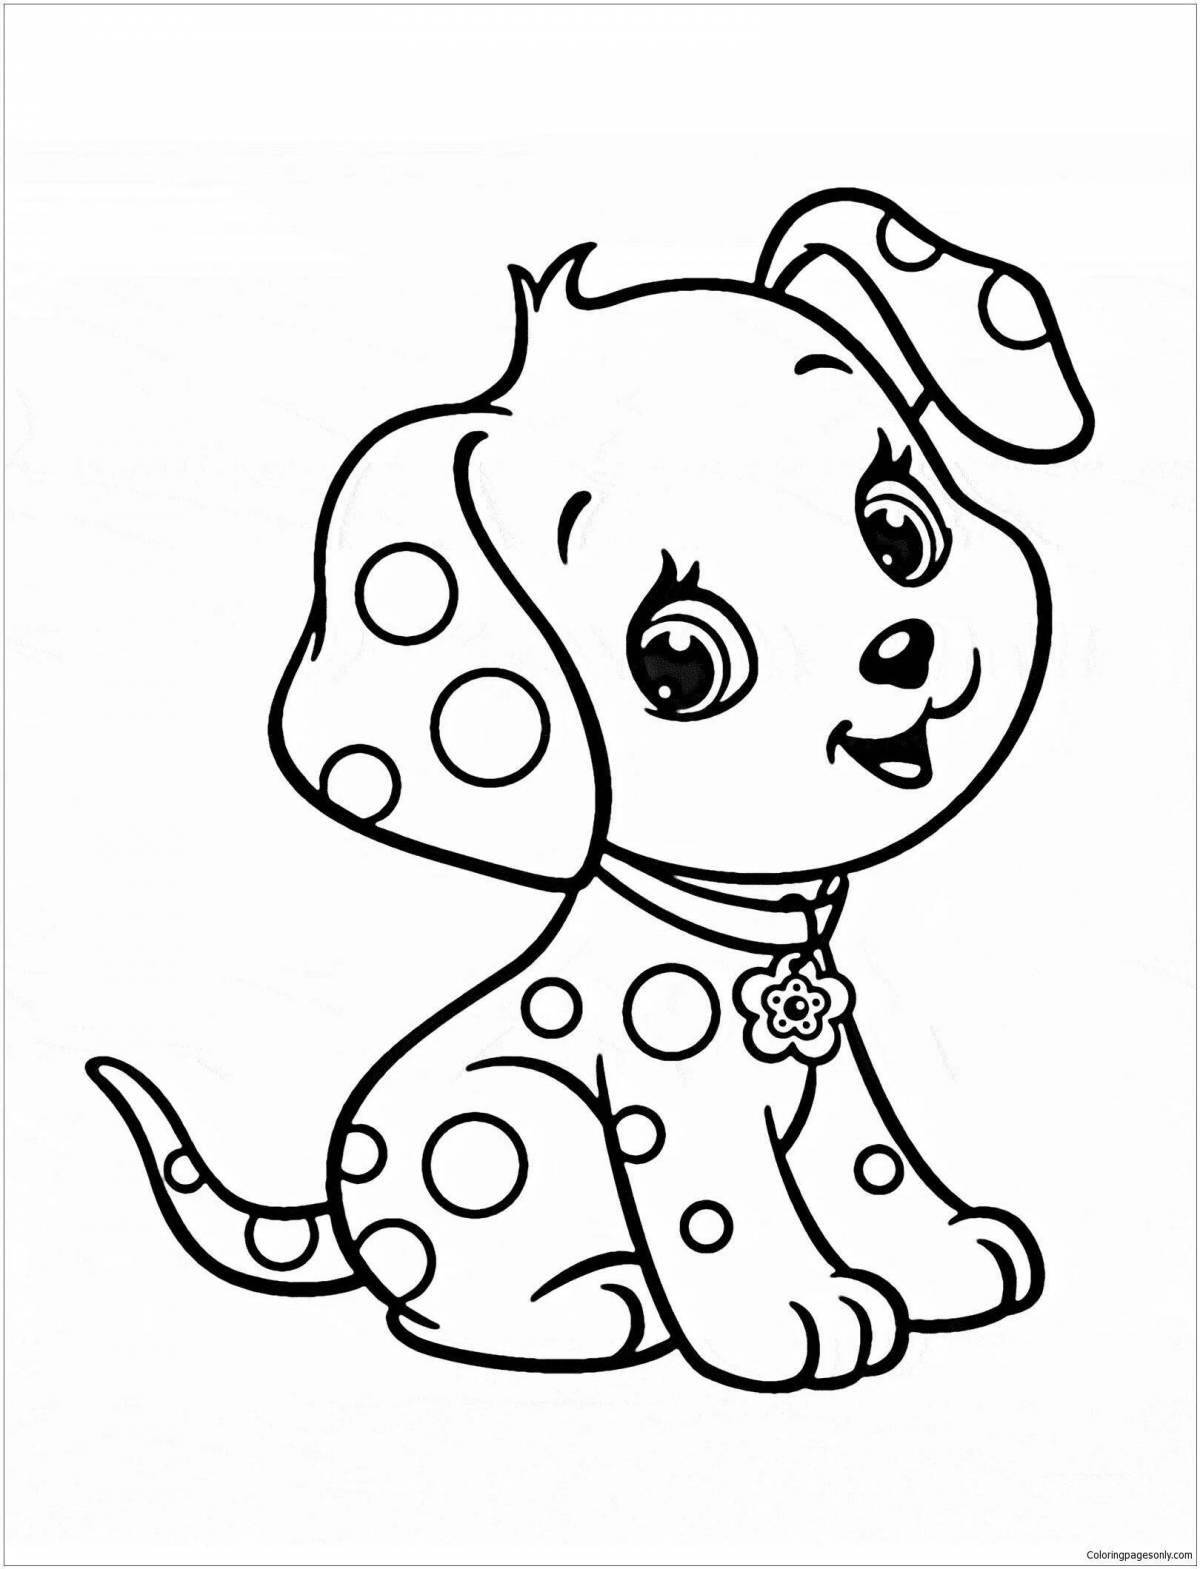 Fluffy cute dog coloring book